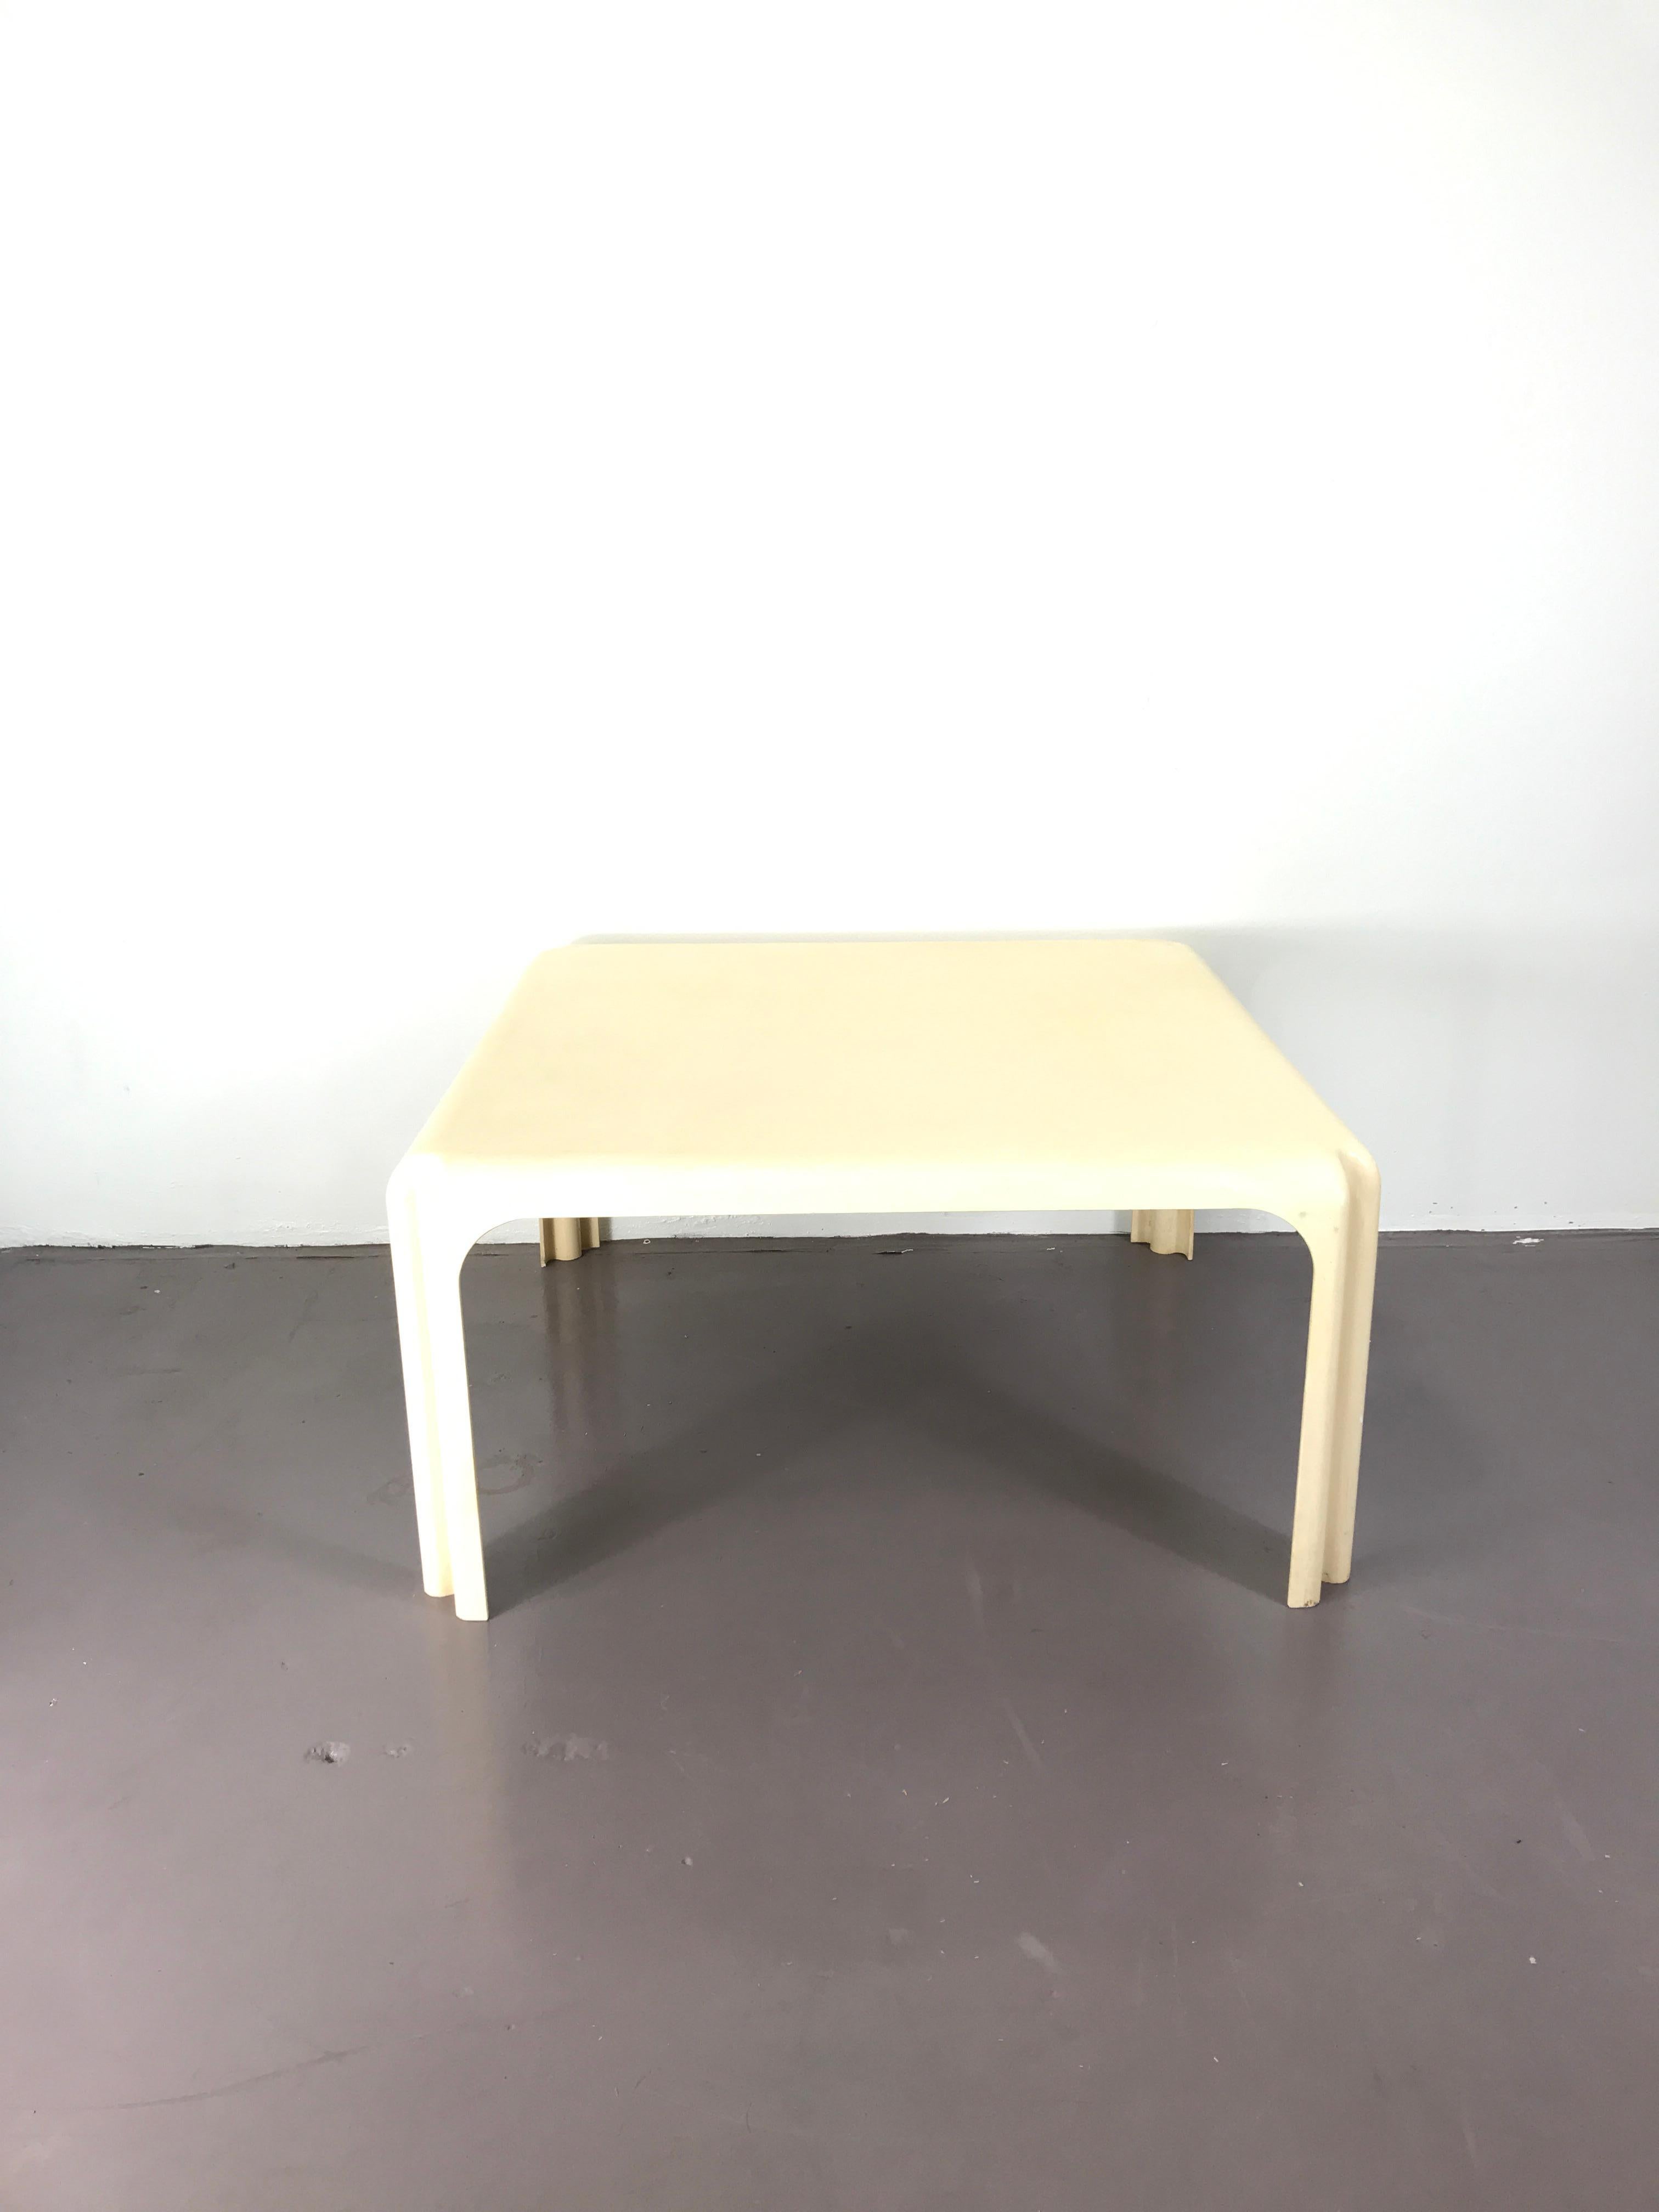 Italian white plastic 1960s coffee table by Vico Magistretti for Artemide Milano, good condition considering the age the tope is still nice and clean just little scratches here and there but over roll good conditions.
The table has signature of